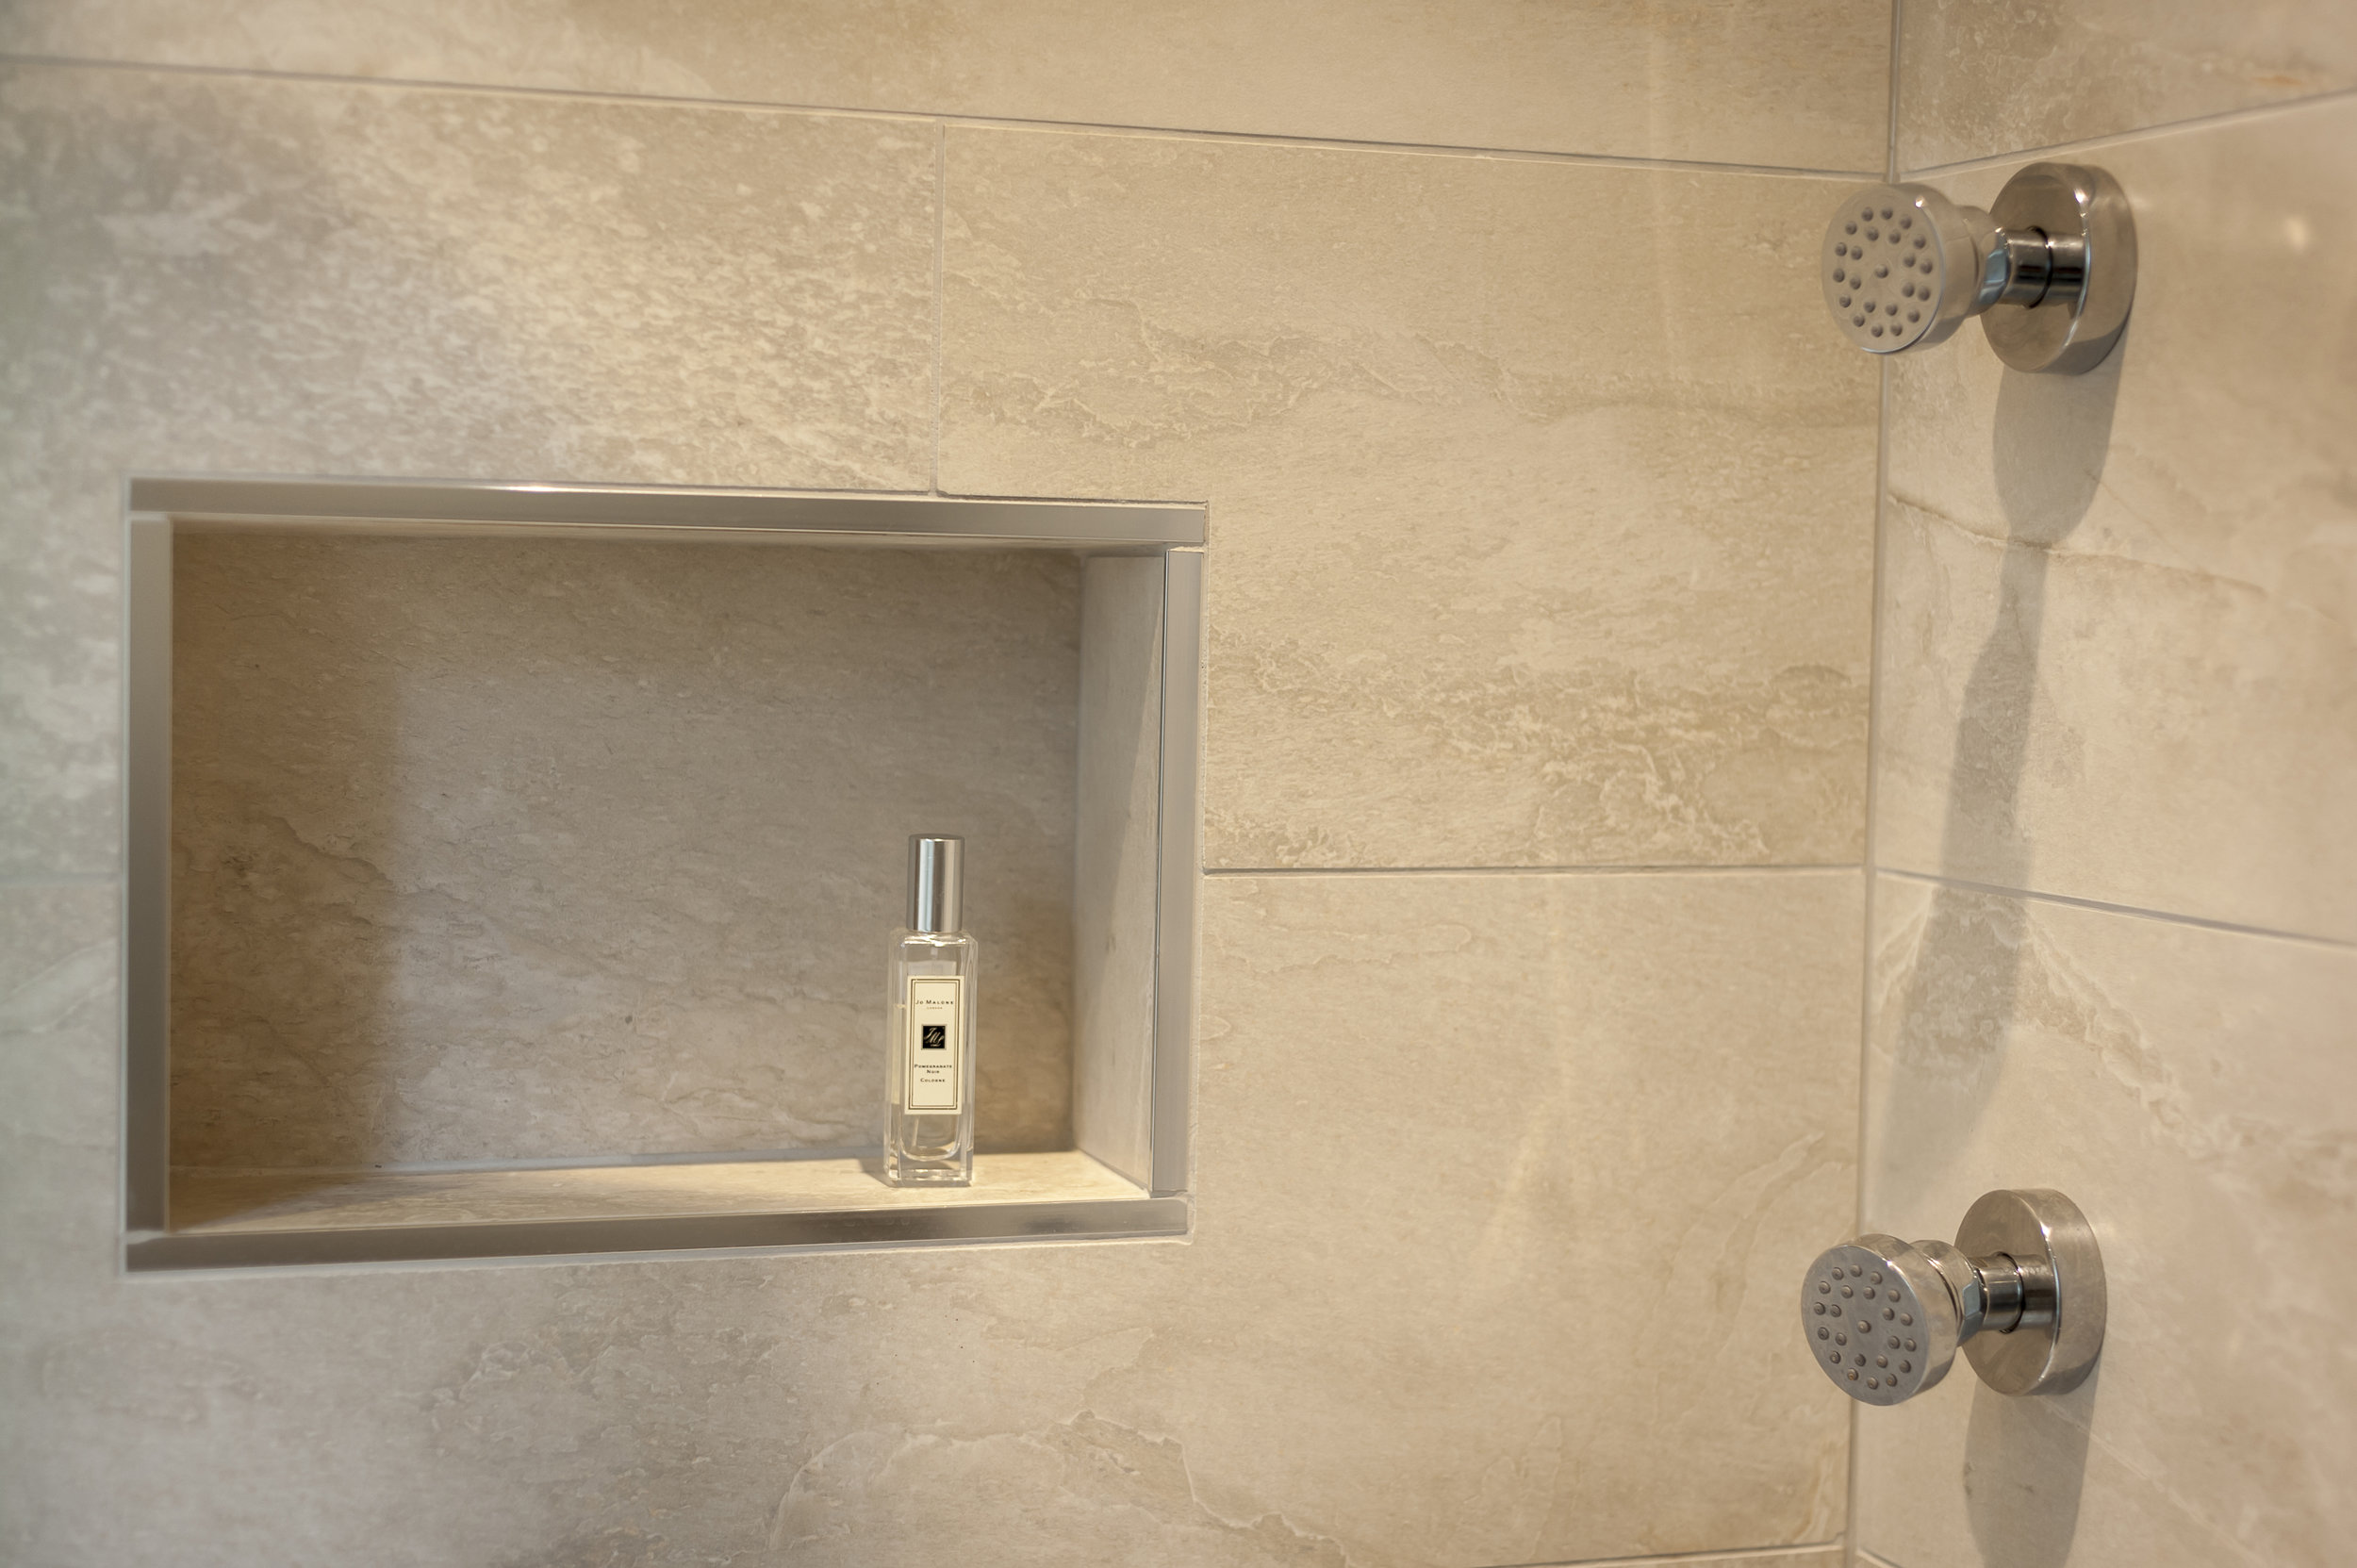 Walk-in Shower with Body Jets against Limestone Tiles